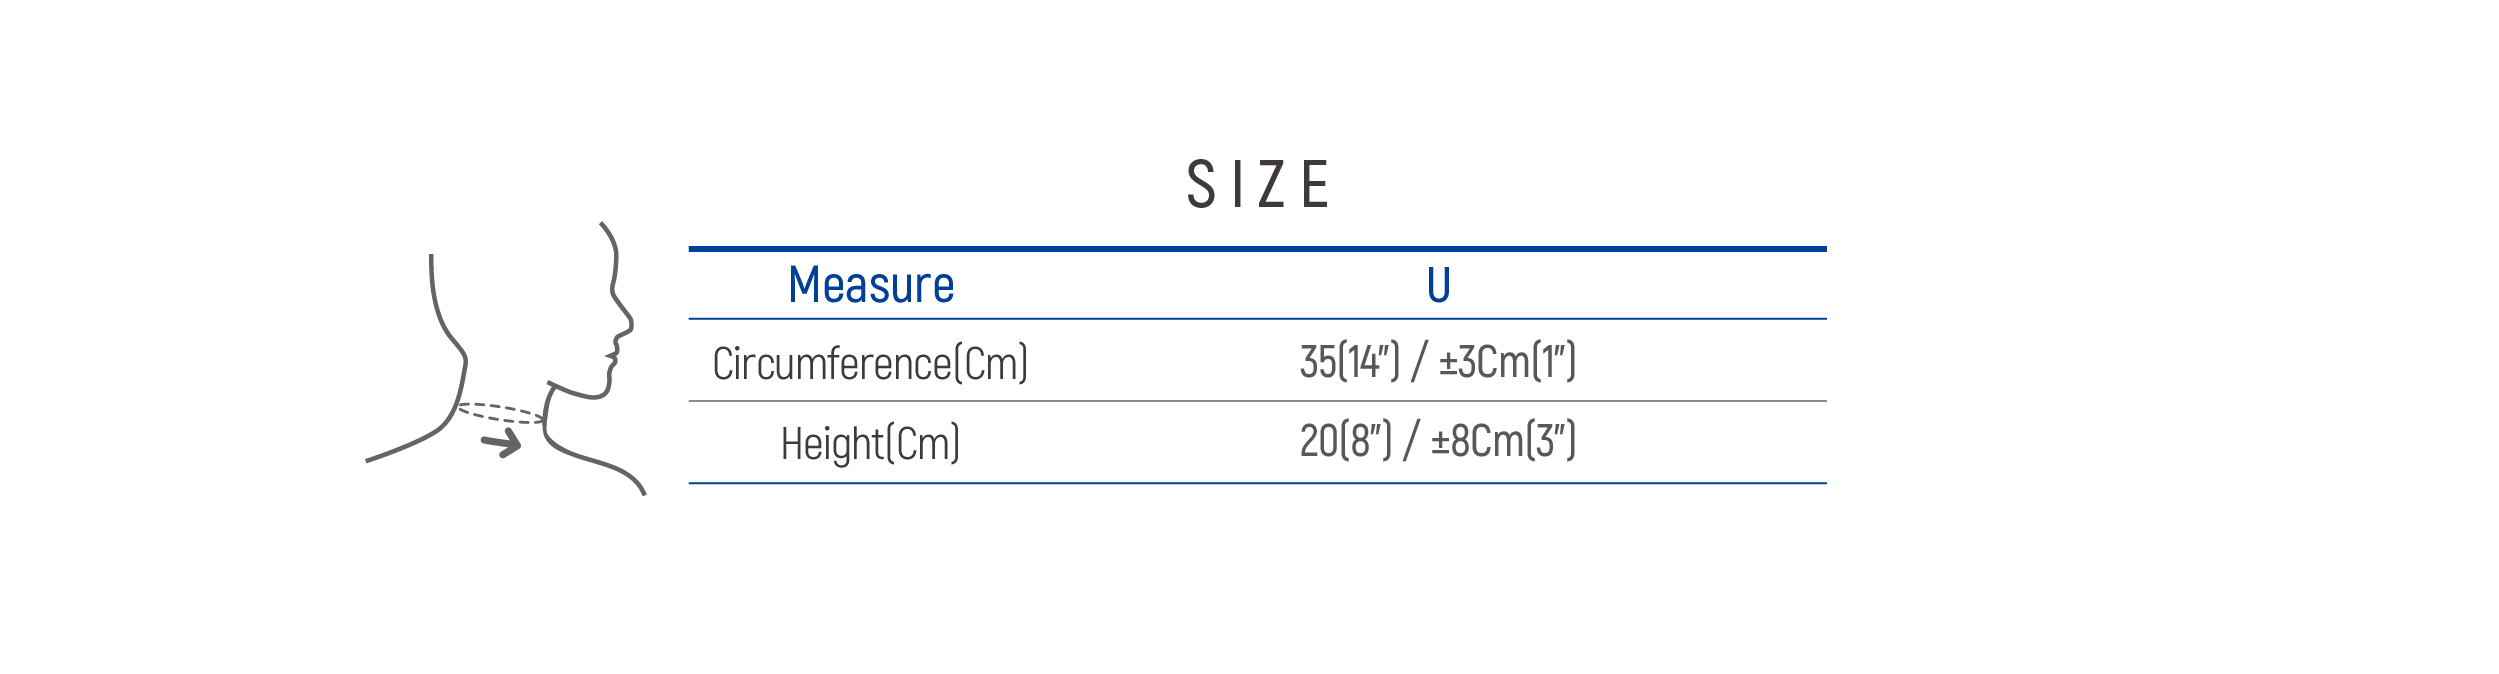 DR-129  Size table image